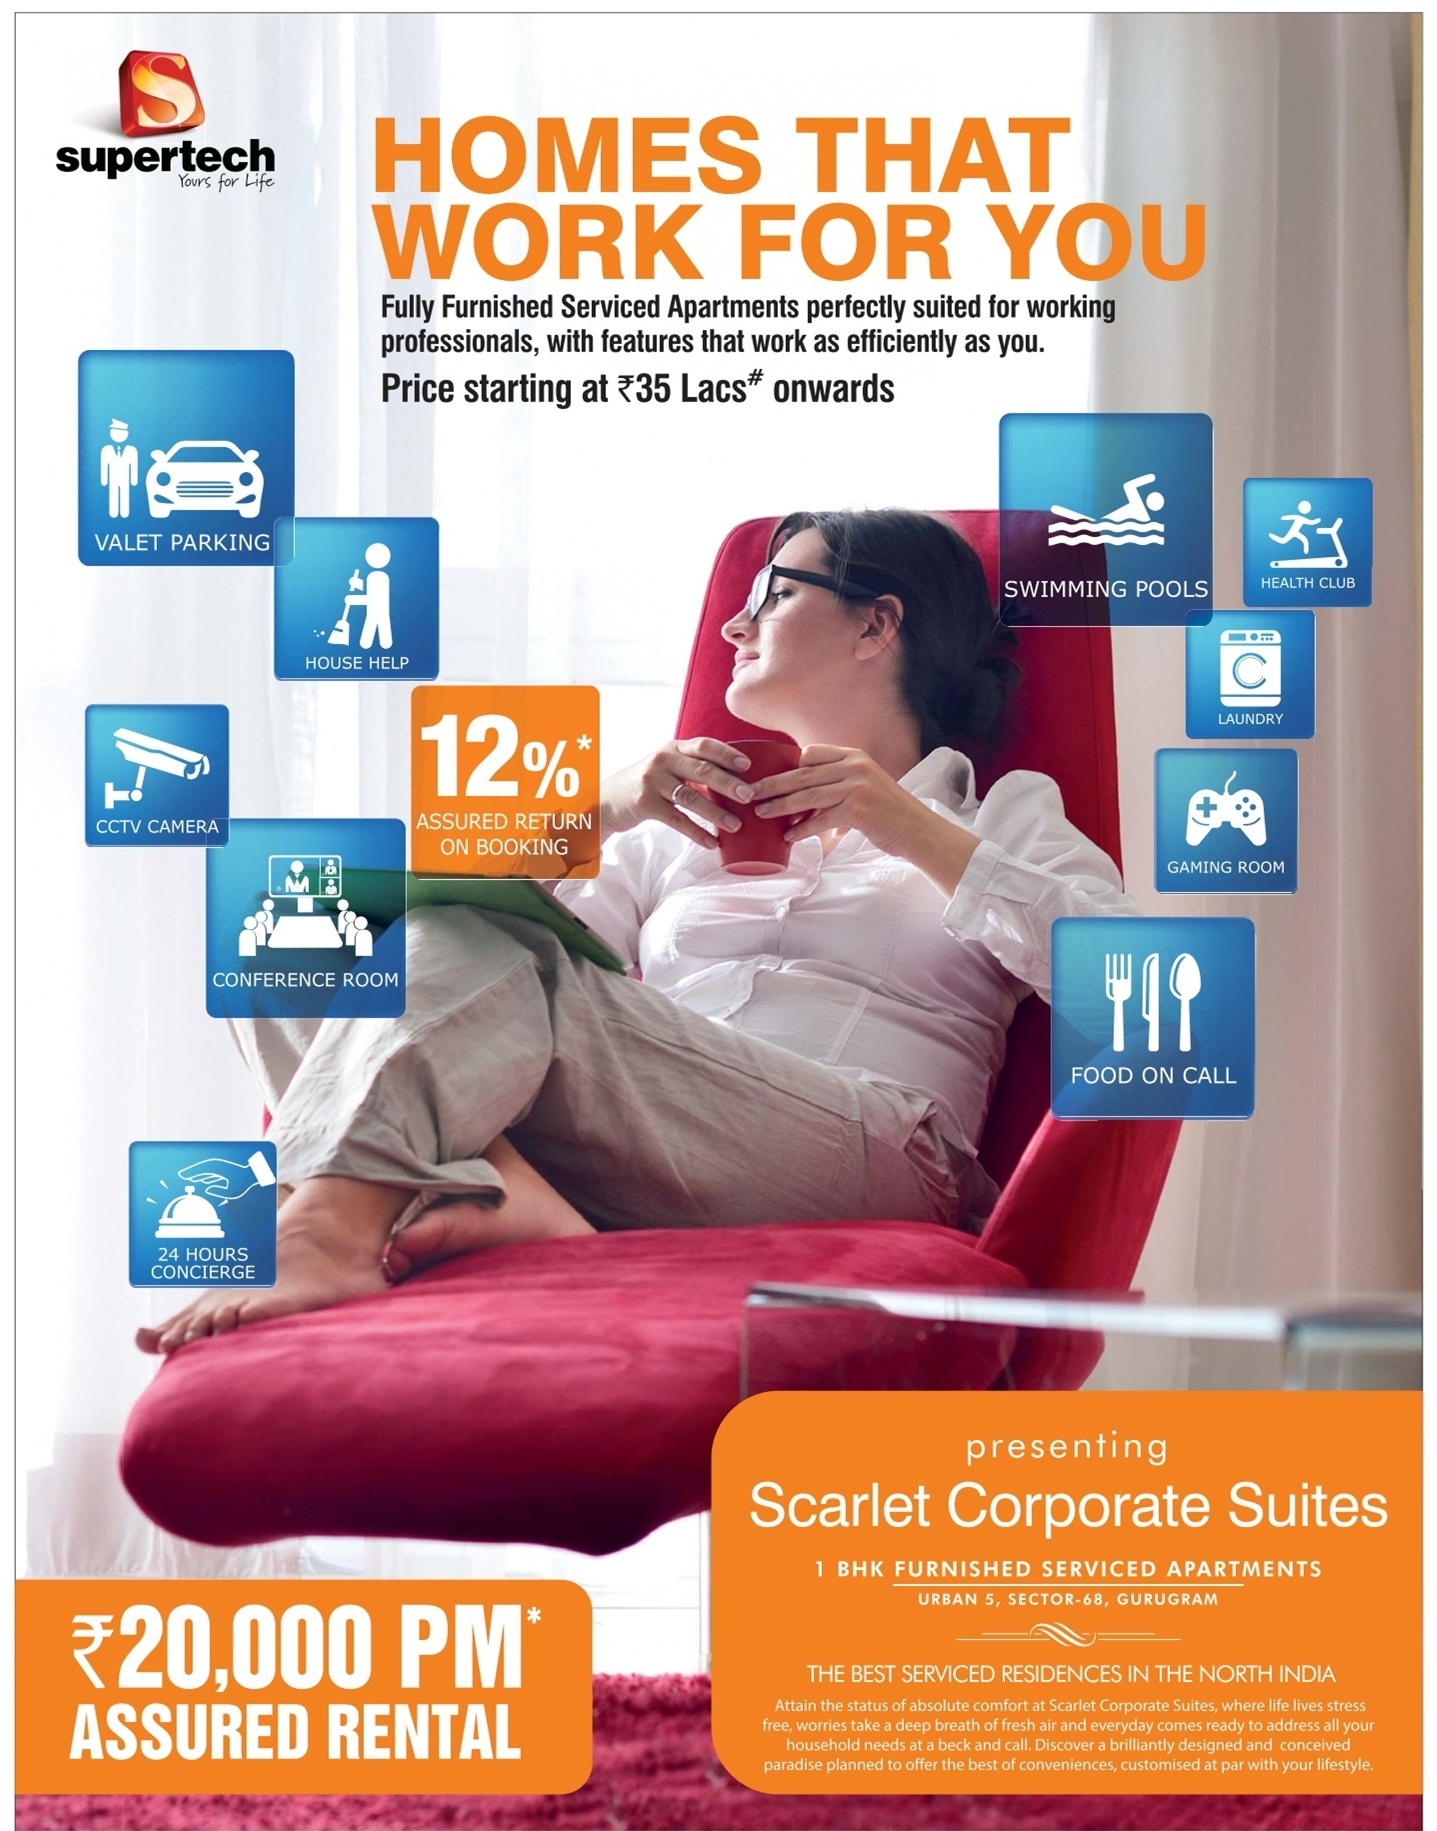 Supertech Scarlet Corporate Suites with 12% Assured Return Update